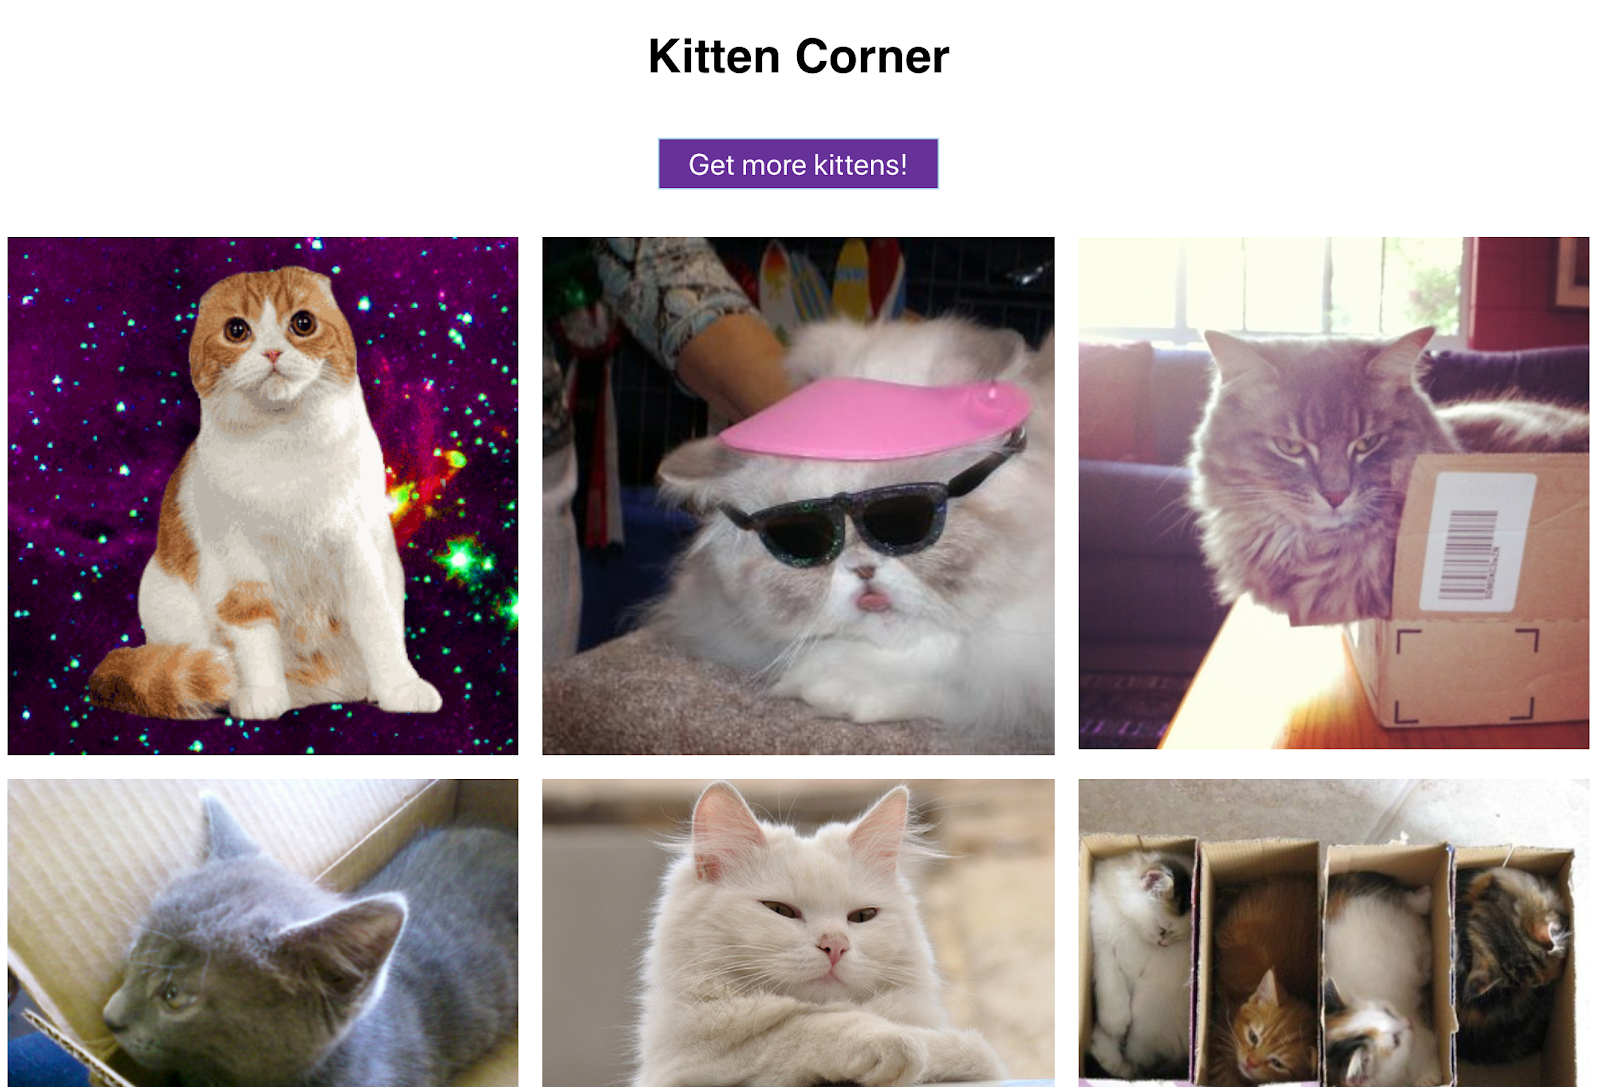 Cute cat images in a grid and a button to show more - this web app truly has it all!